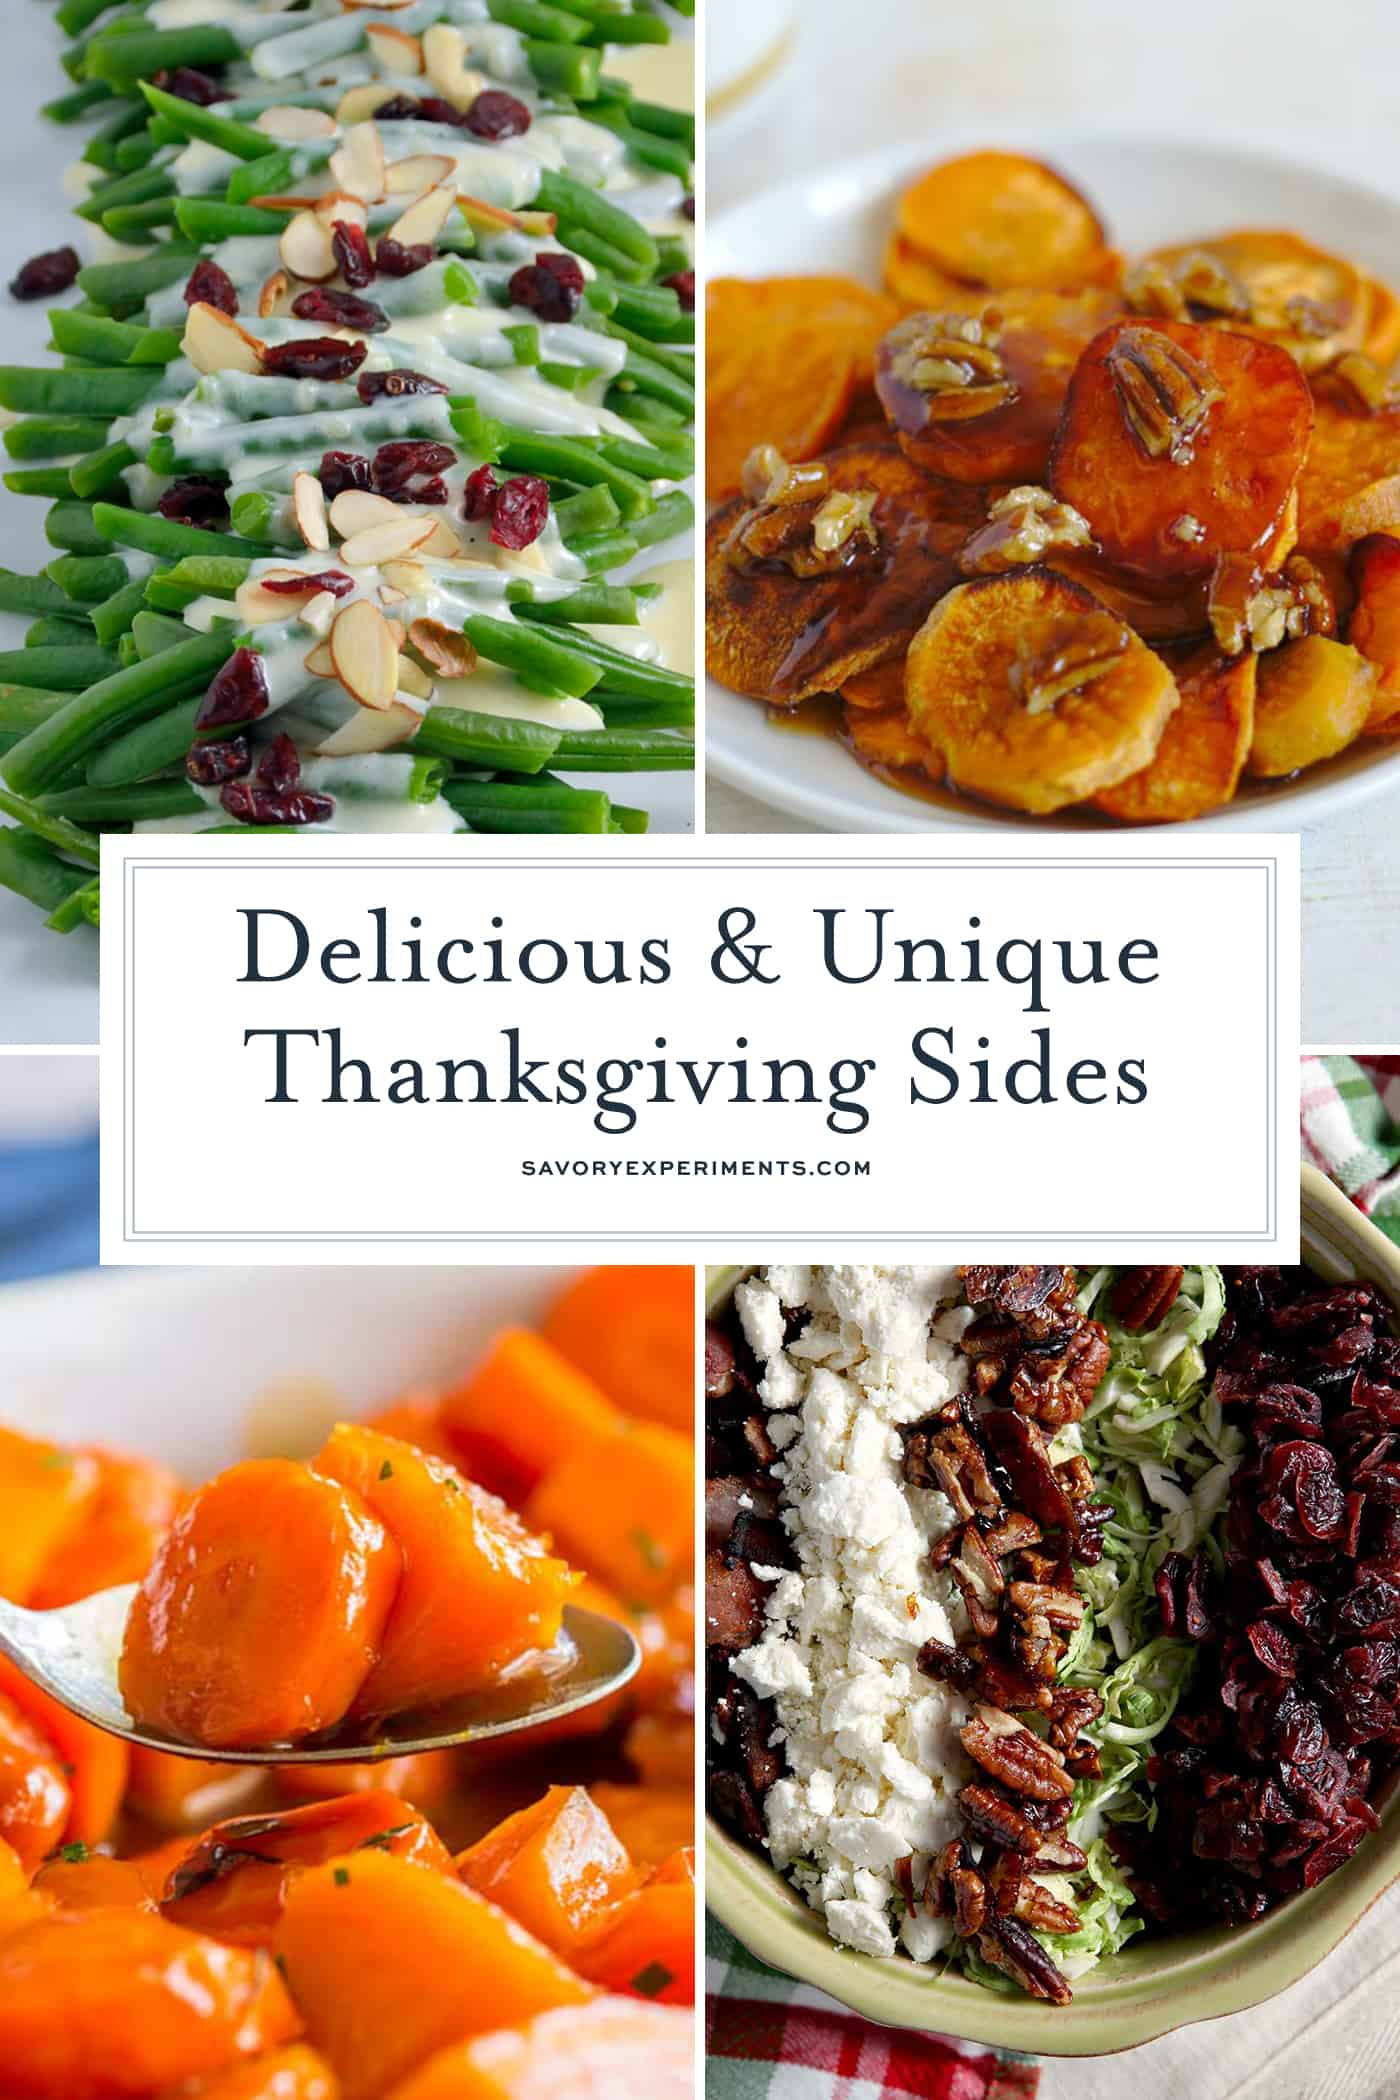 Unusual Thanksgiving Side Dishes
 Thanksgiving Sides Unique and Delicious Thanksgiving